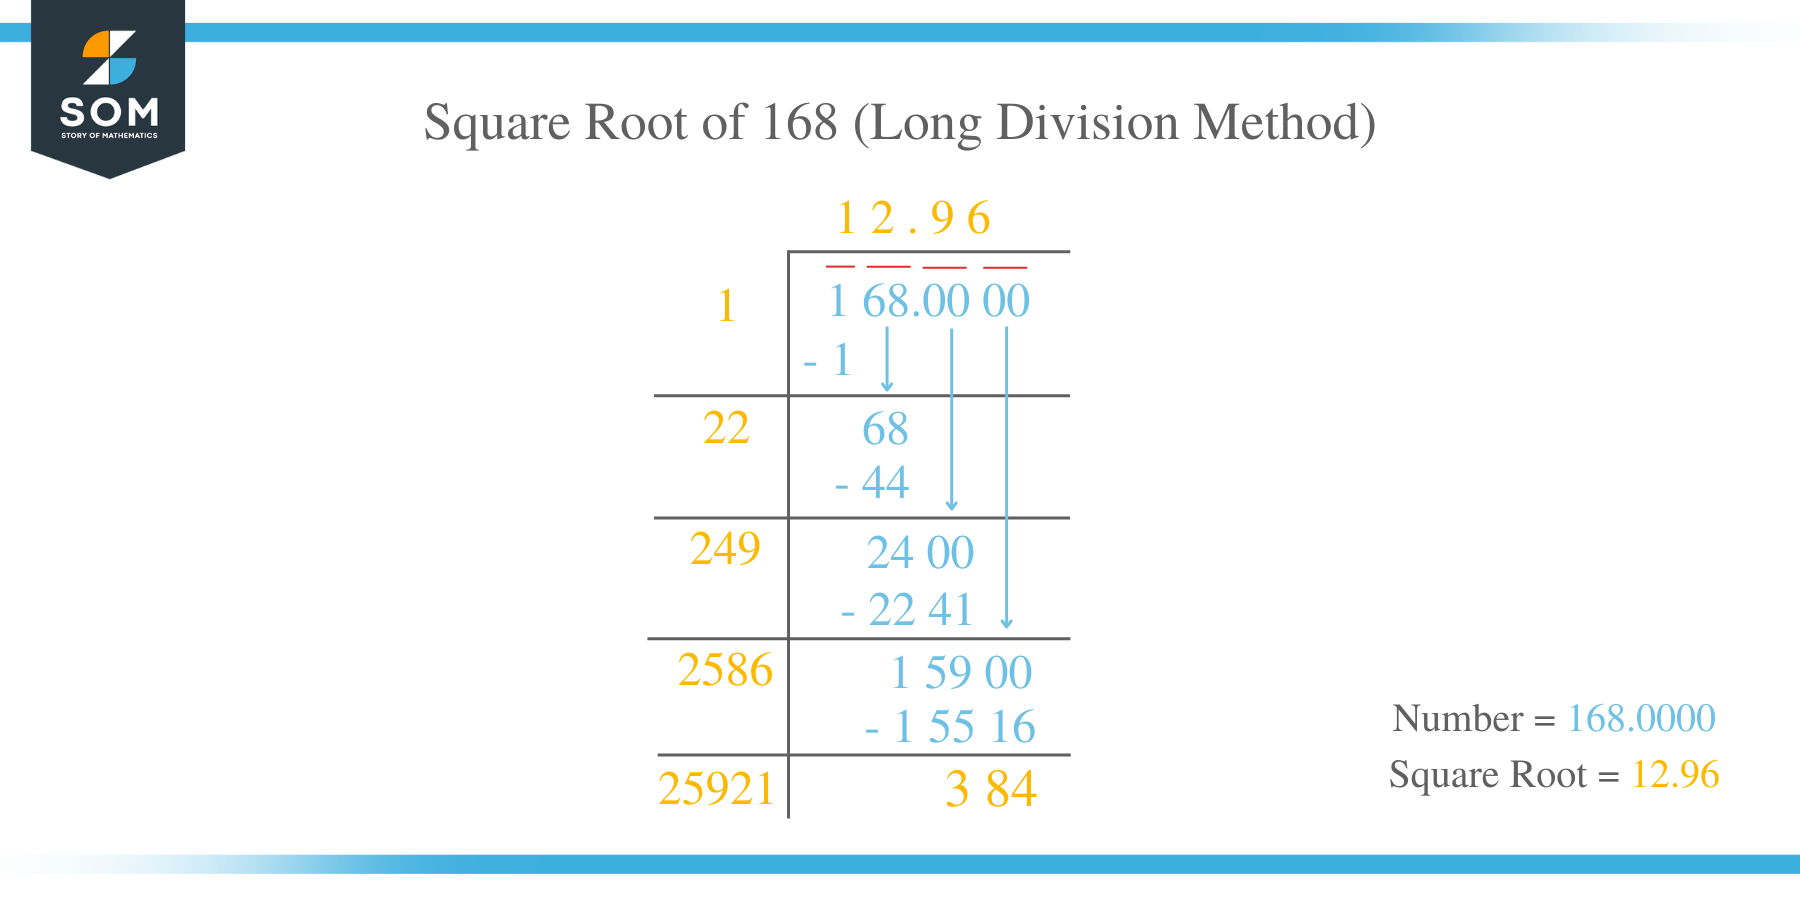 Square Root of 168 by Long Division Method